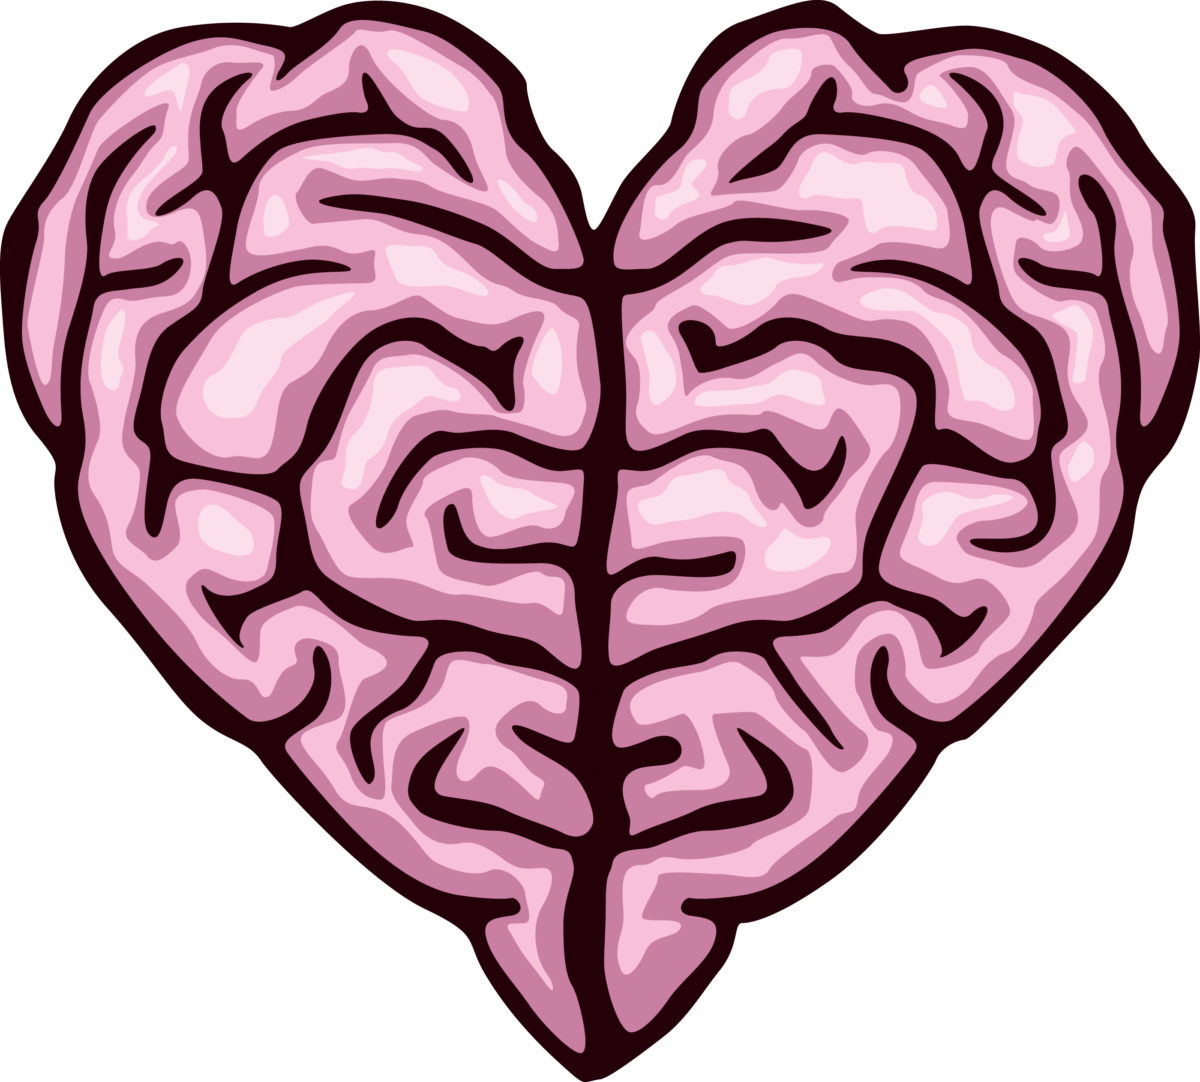 Drawing of brain in the shape of a heart